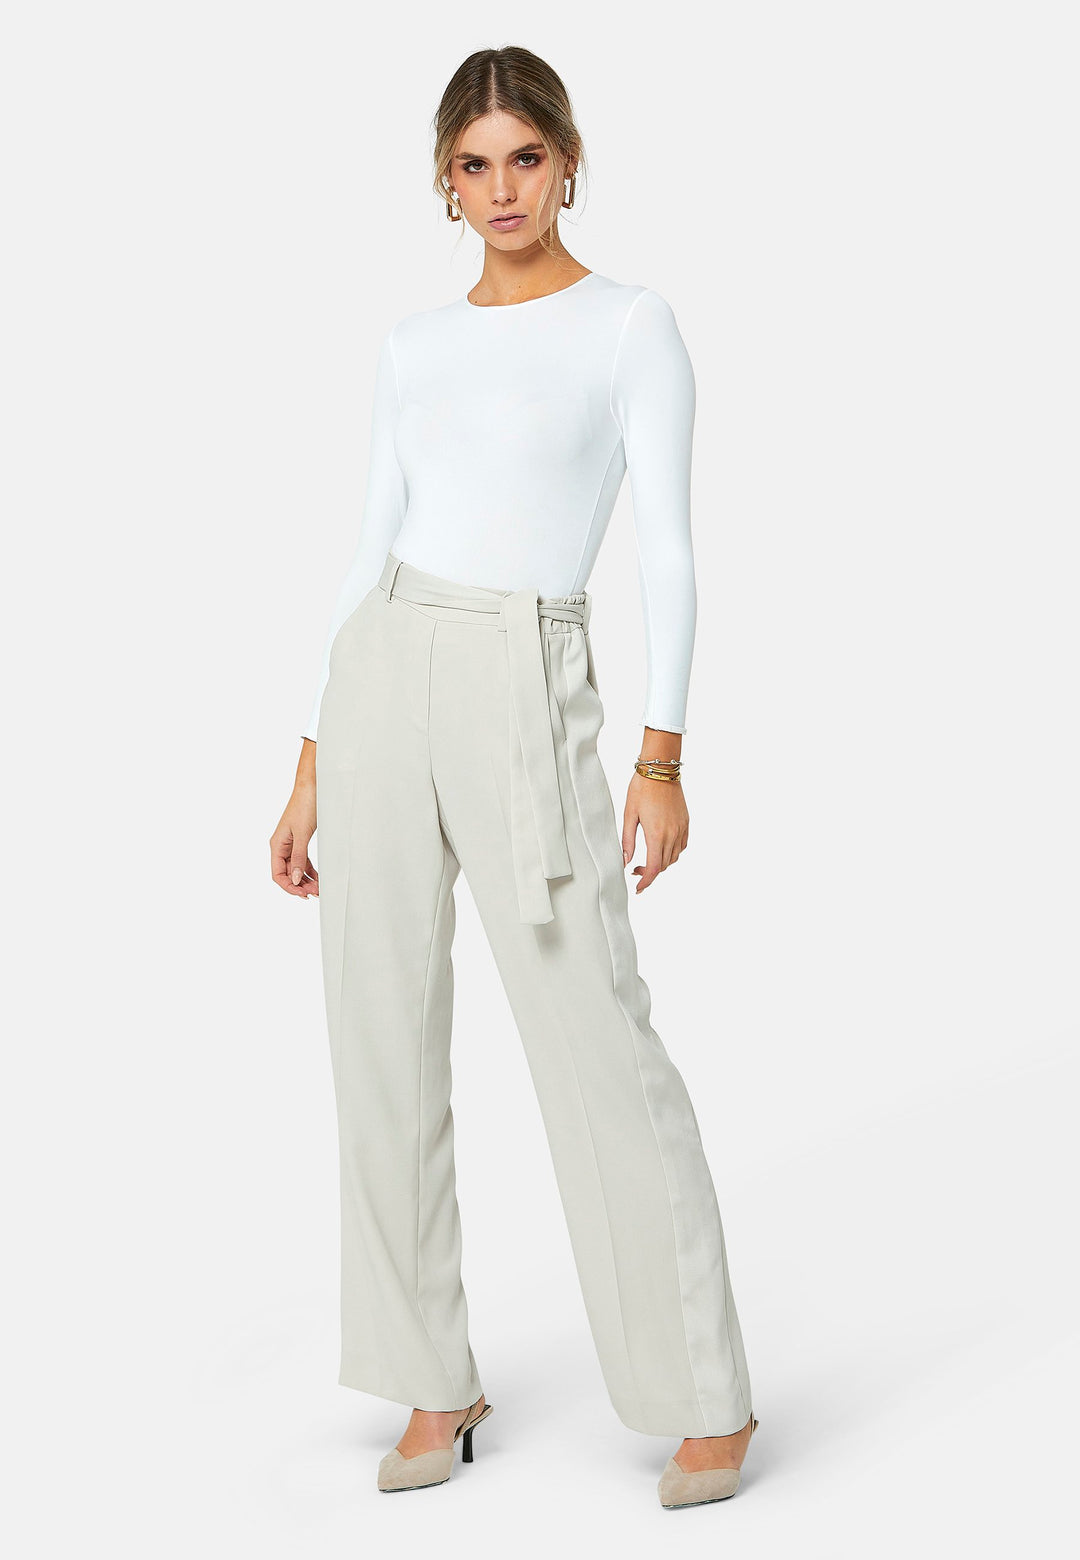 Delilah, Stone flat front straight leg trouser with side seam pockets in fluid satin back crepe. Feature a detachable self-fabric belt and a satin stripe along the side seam of the leg. Coordinate with the white timeless tops or matching Lal top for a relaxed take on 'after six' dressing.